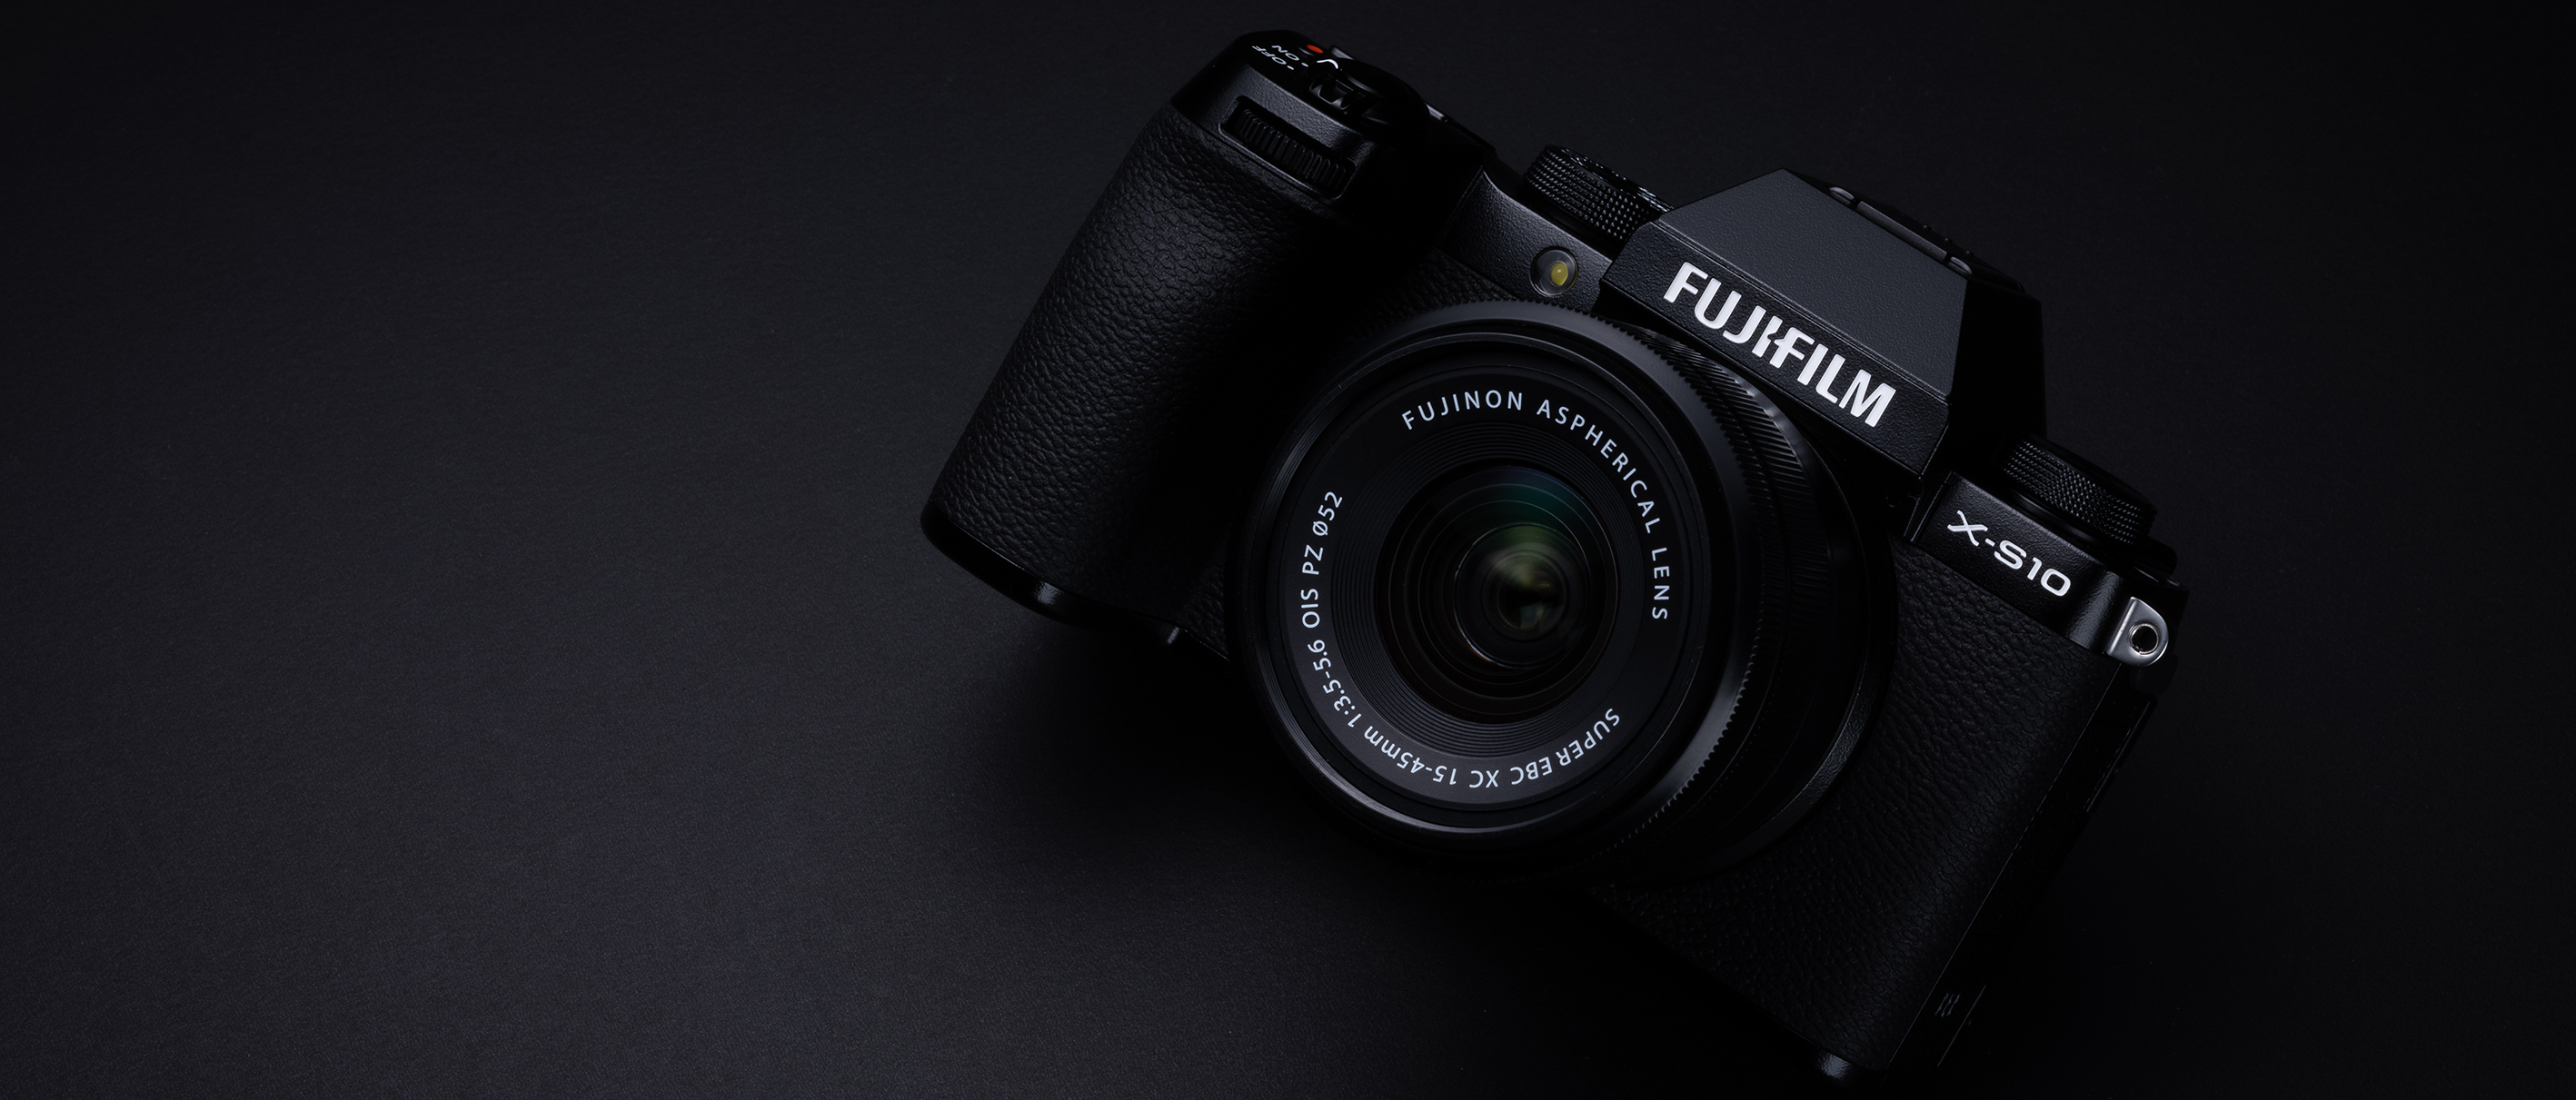 Background: Post Thumbnail: Fujifilm – value from innovation